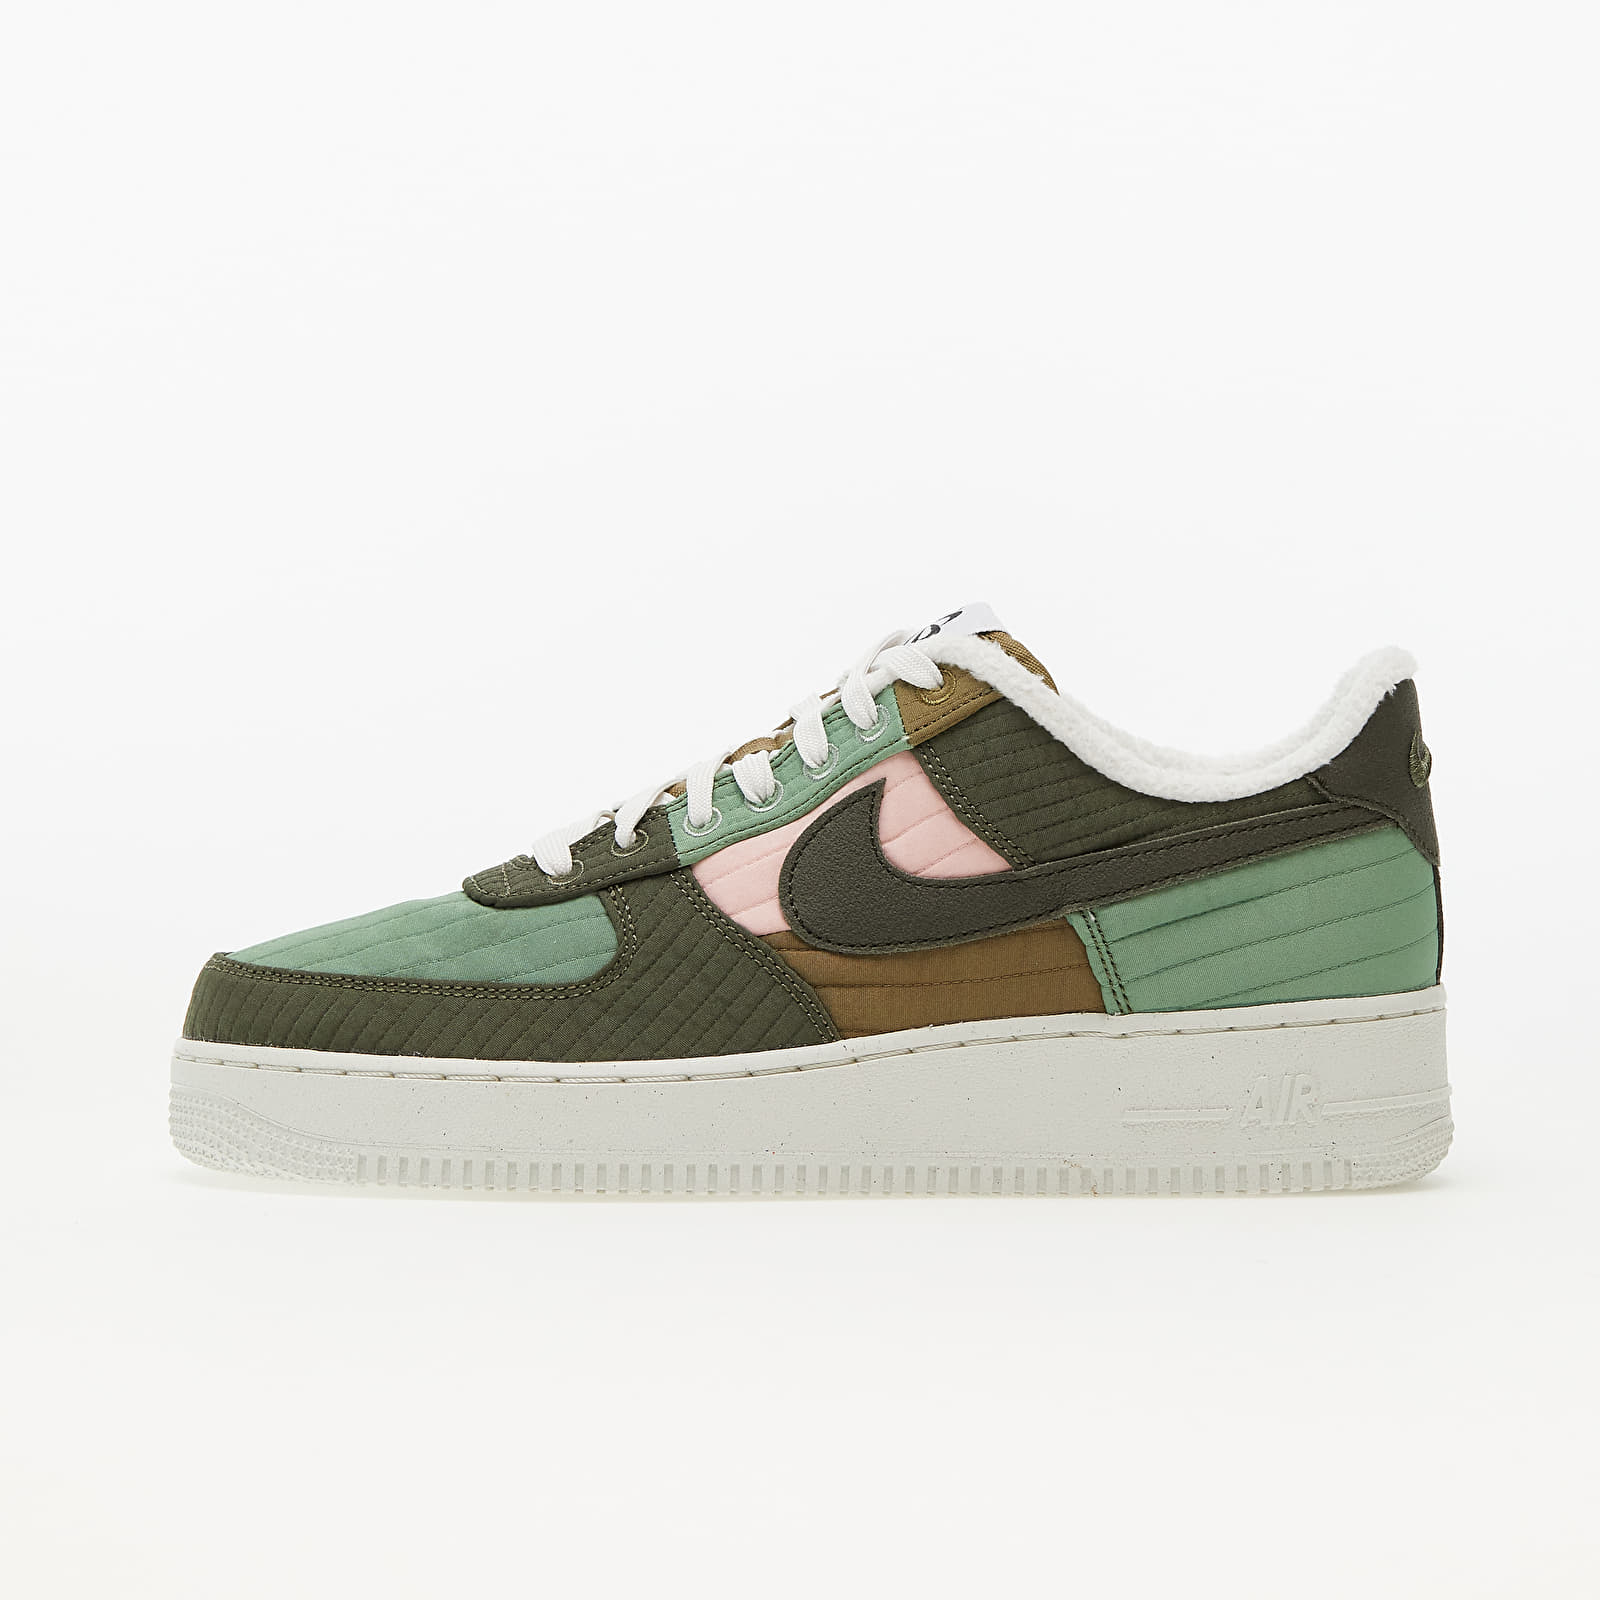 Chaussures et baskets homme Nike Air Force 1 '07 LX Oil Green/ Sequoia-Medium Olive